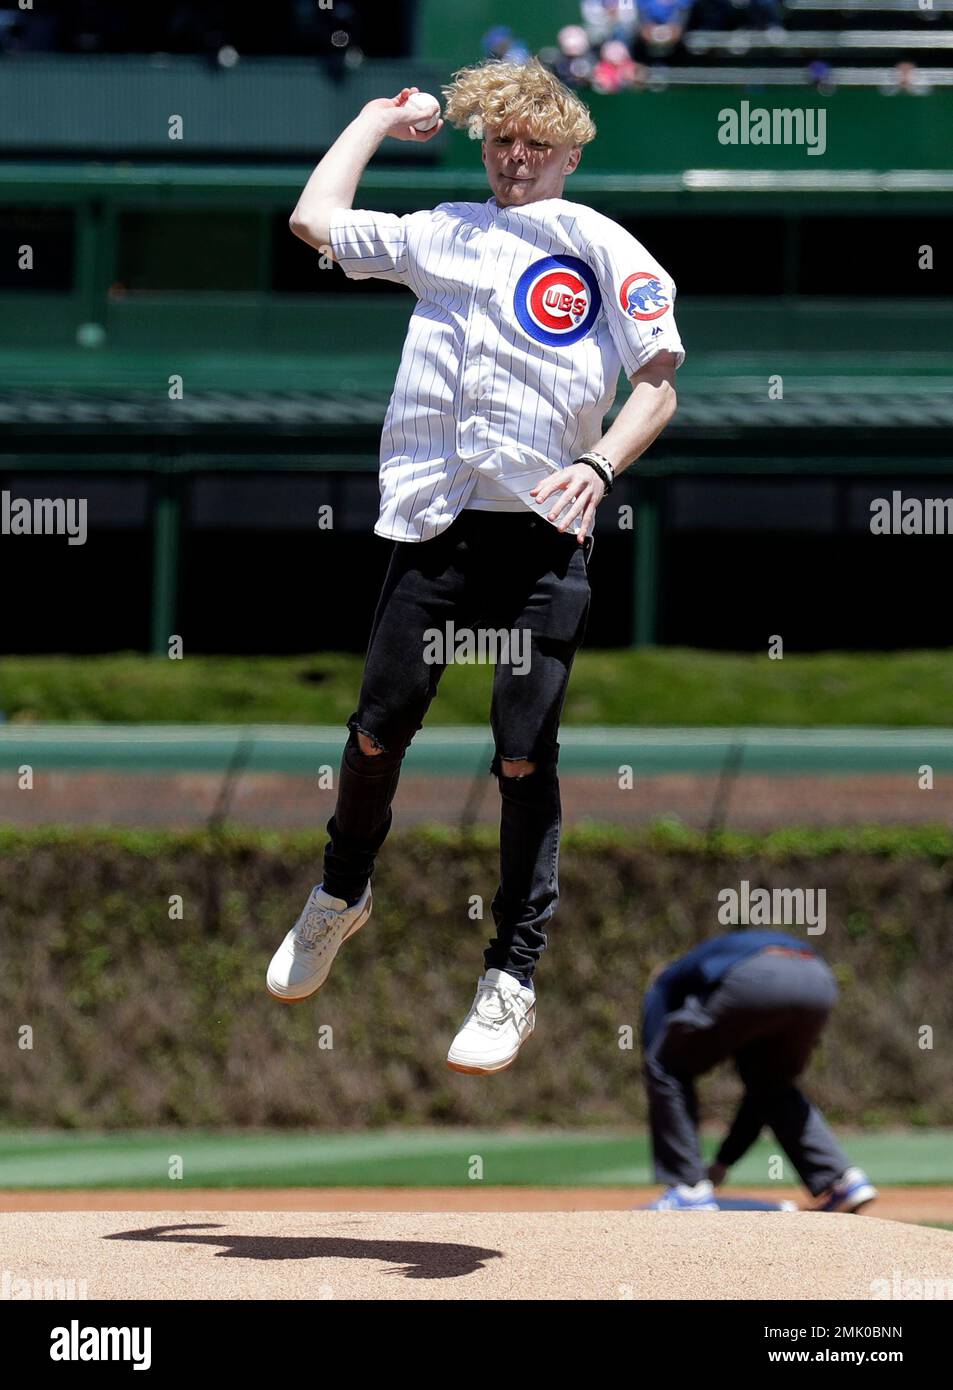 Youtube creator Tristan Jass throws out a ceremonial first pitch before a baseball game between the Milwaukee Brewers and the Chicago Cubs, Friday, May 10, 2019, in Chicago